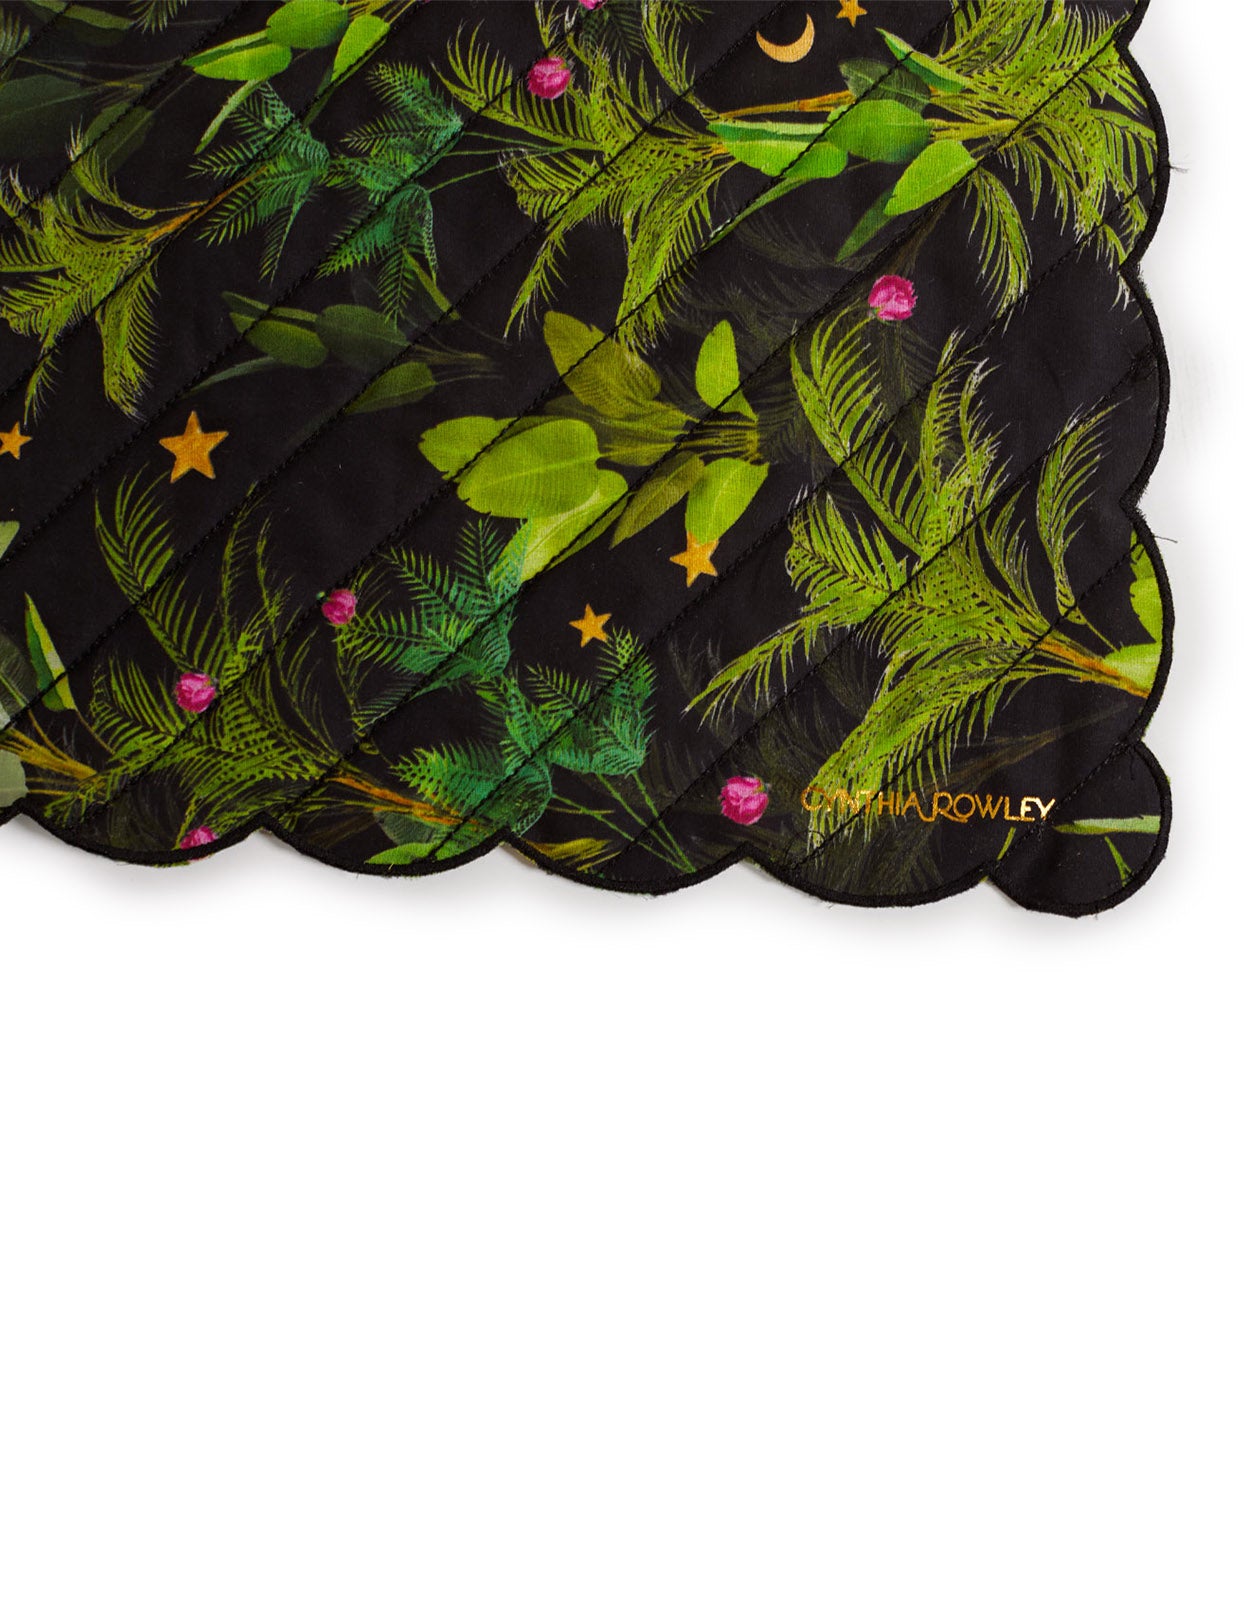 Quilted Cotton Placemat – Cynthia Rowley